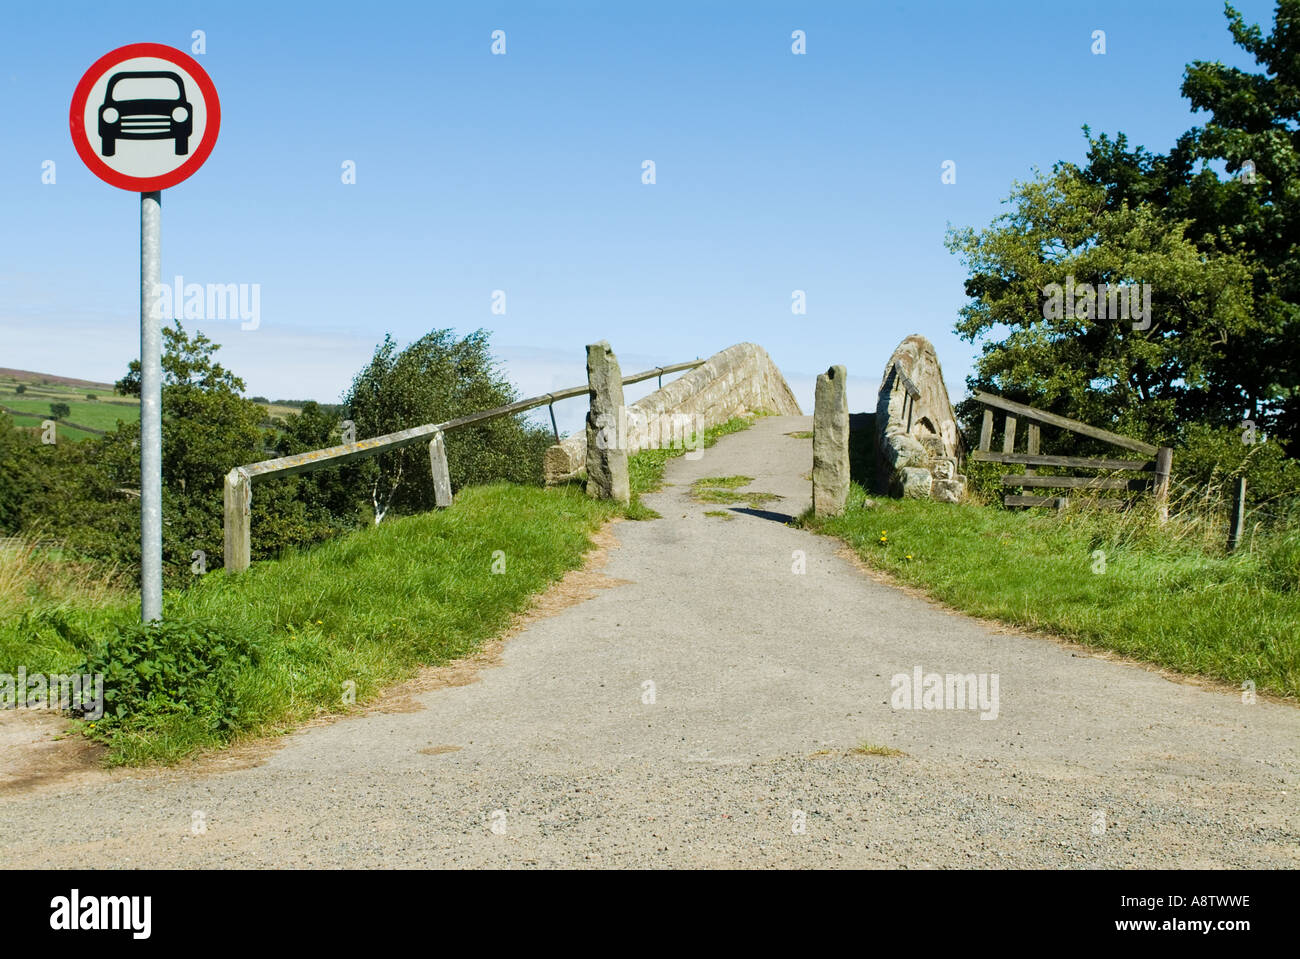 Humpback bridge with No Entry for Cars Sign in North Yorkshire Stock Photo